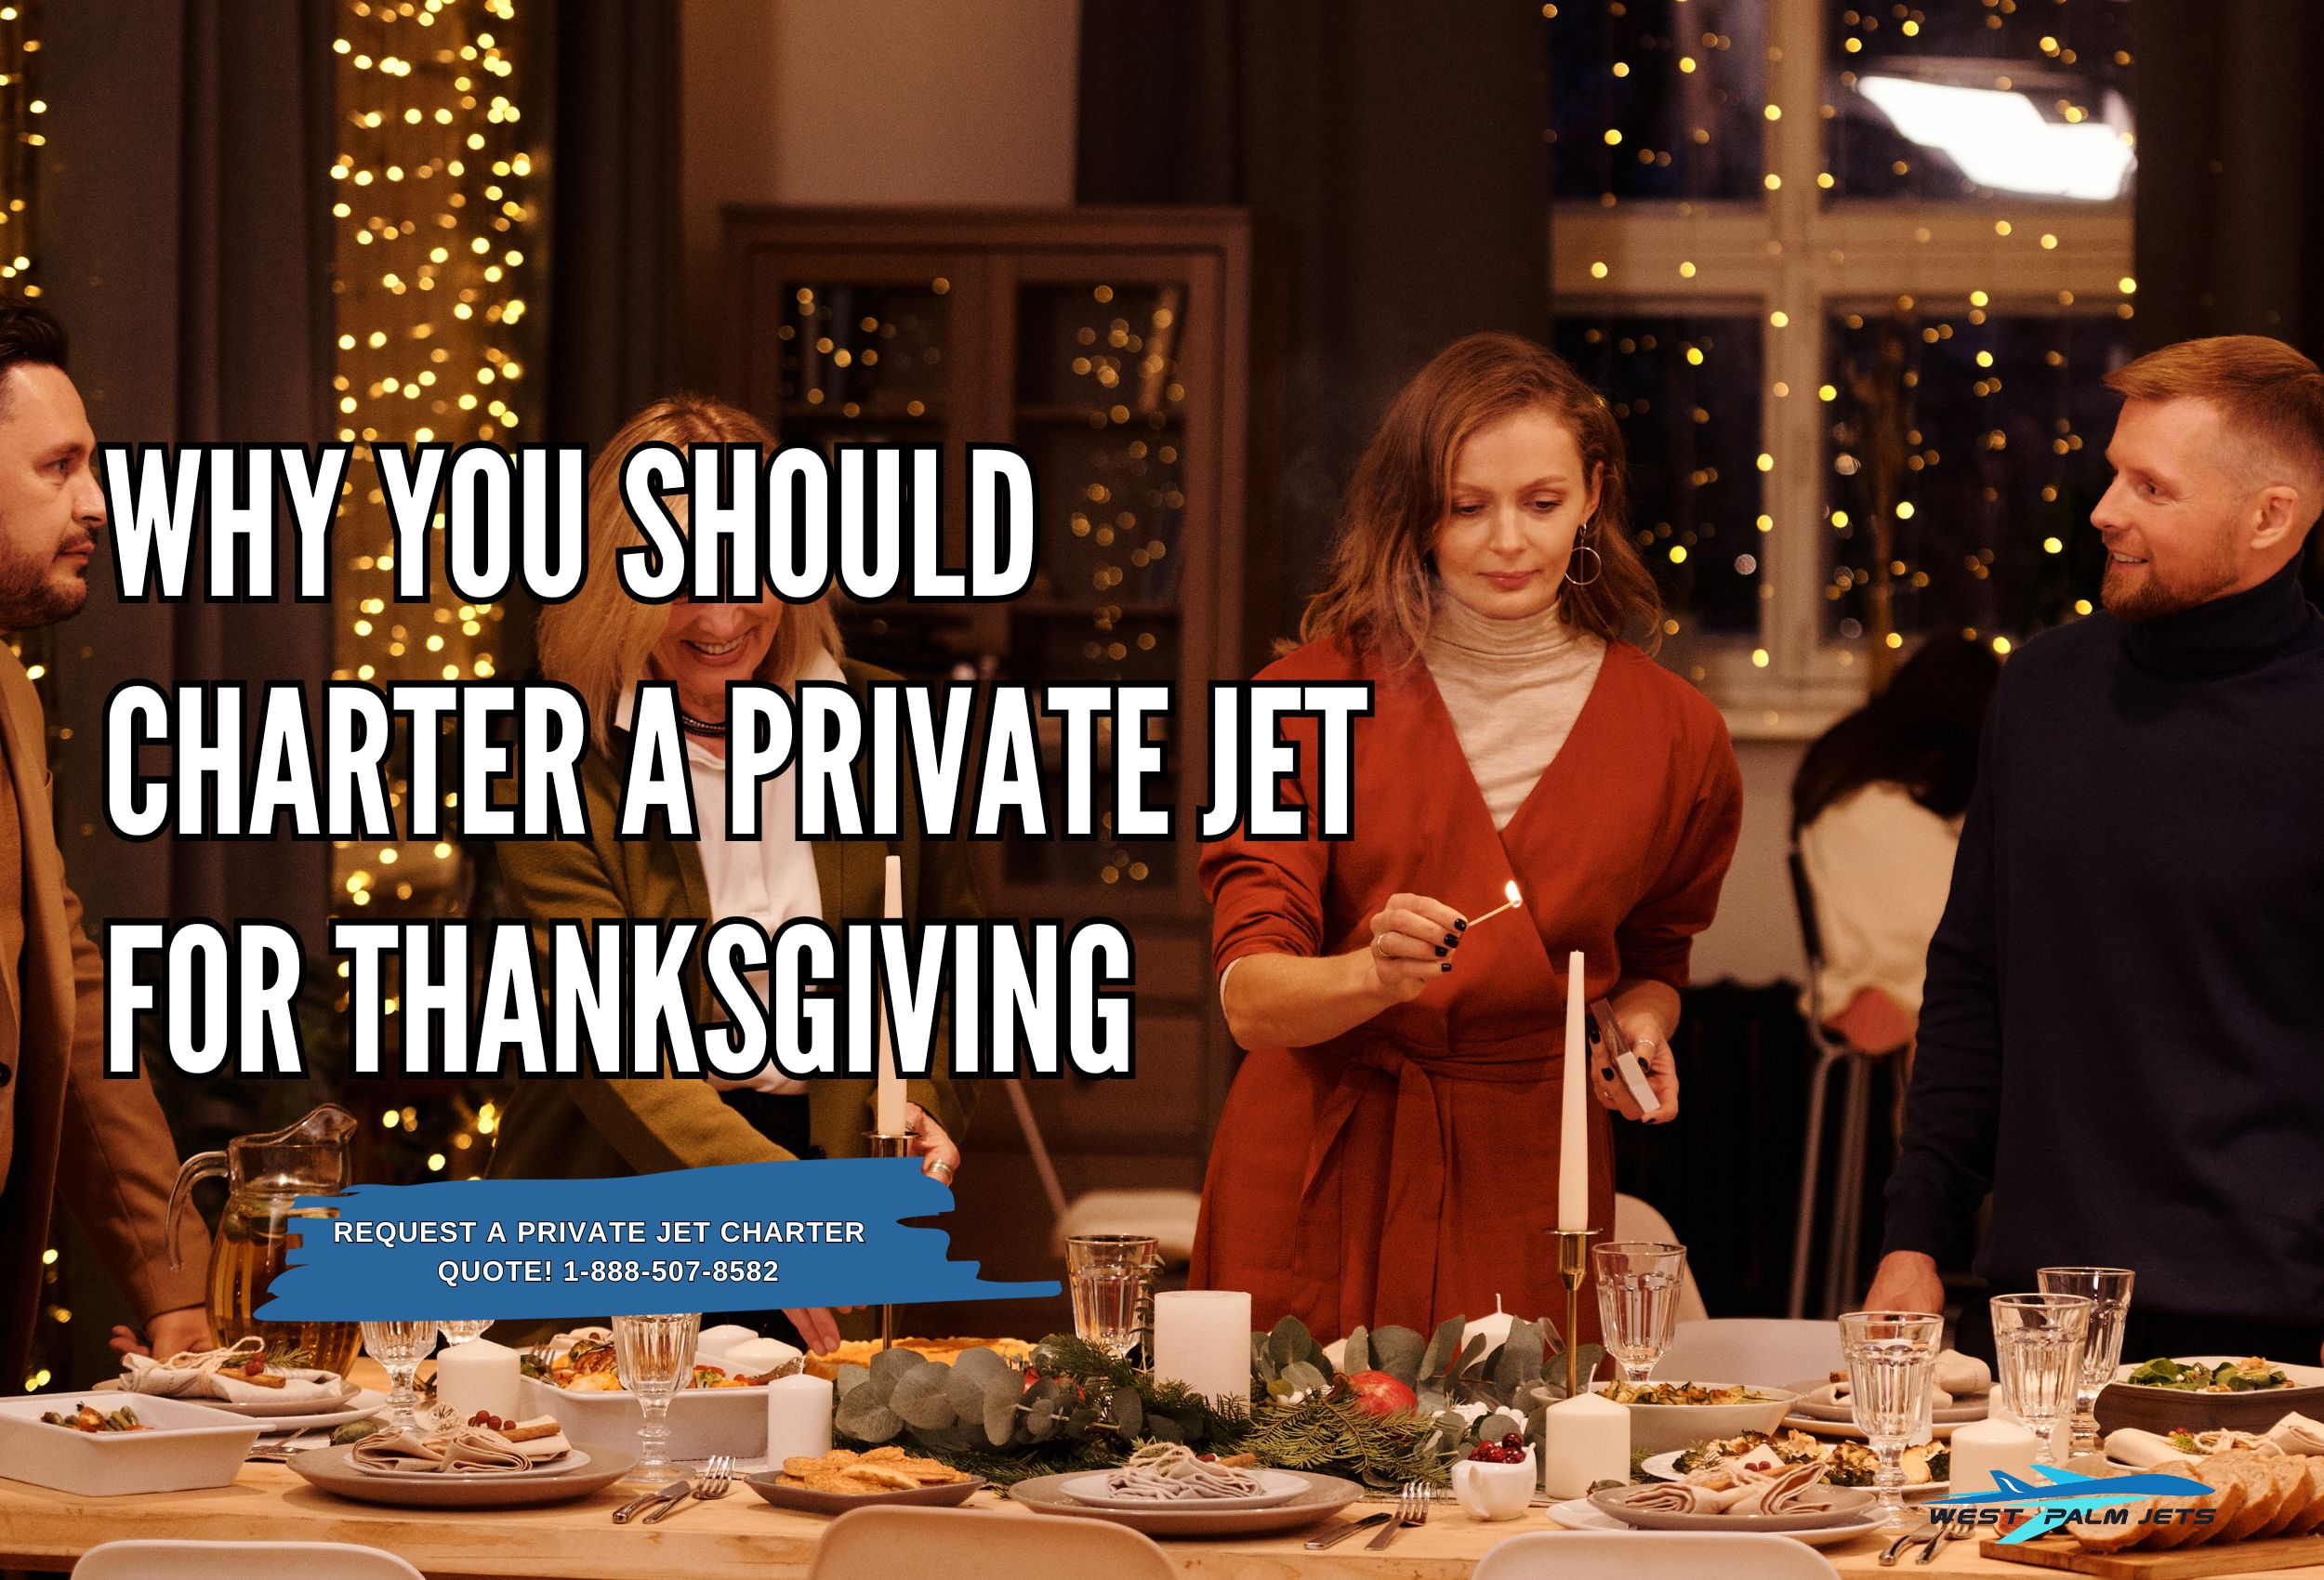 Why You Should Charter a Private Jet for Thanksgiving